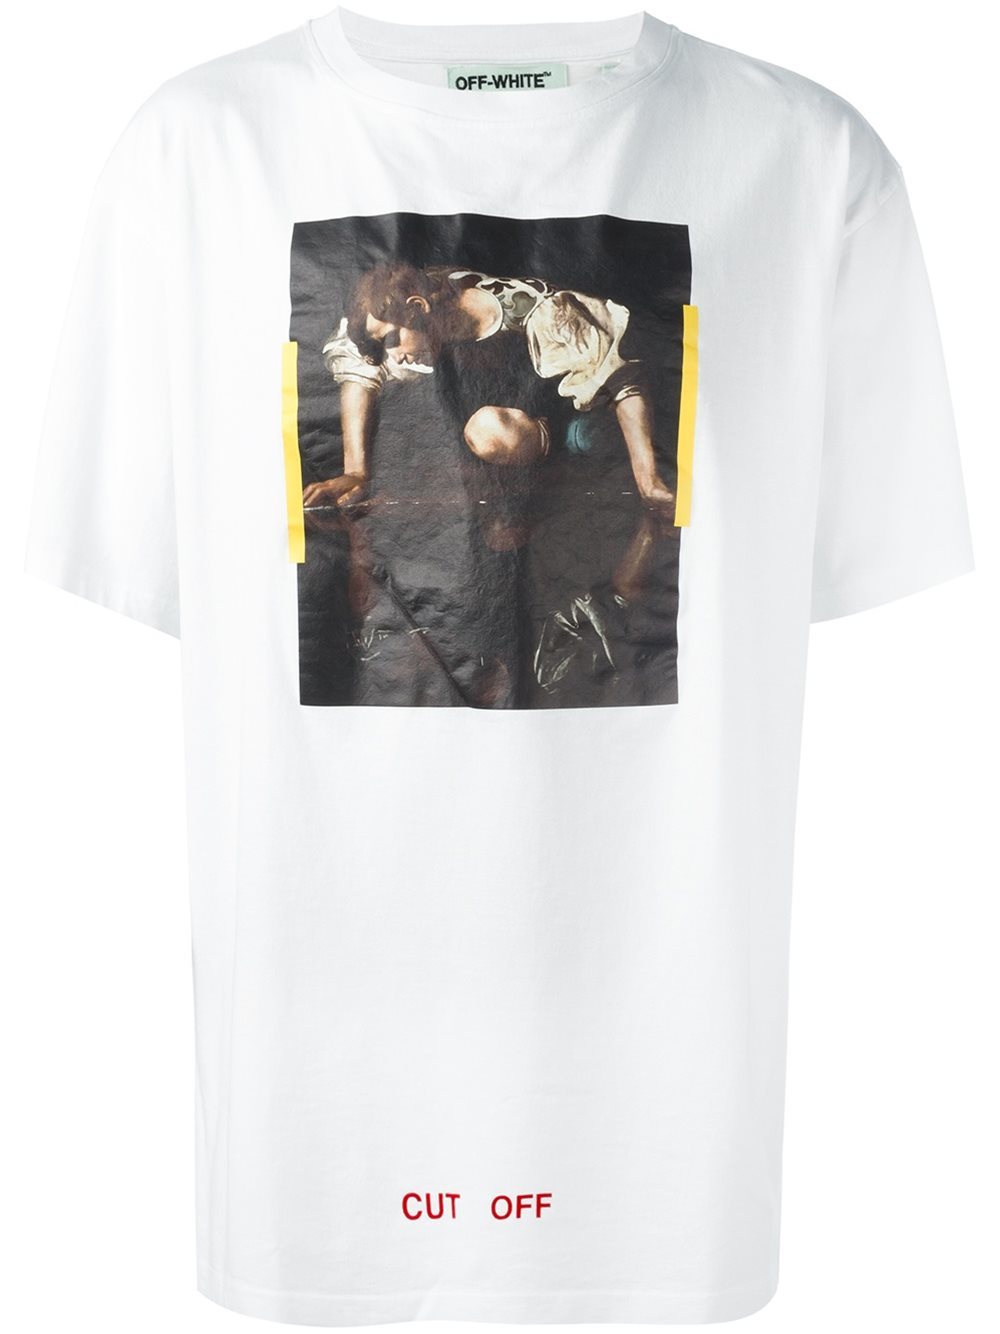 Off-White c/o Virgil Abloh Cut Off Printed Cotton T-Shirt in White for Men  - Lyst